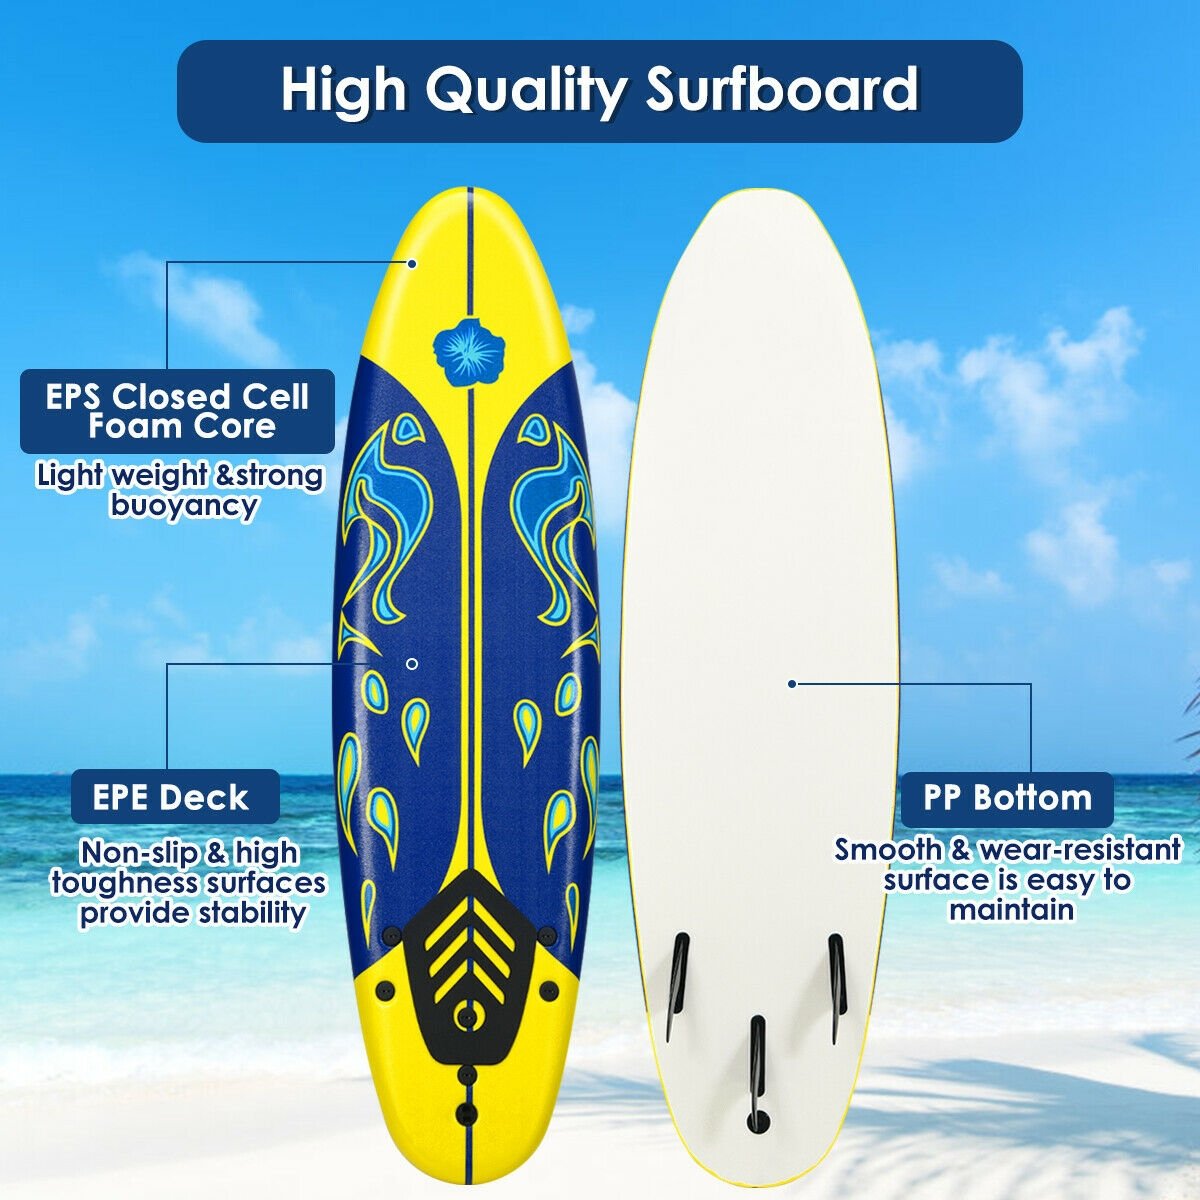 6 Feet Surfboard with 3 Detachable Fins, Yellow - Gallery Canada